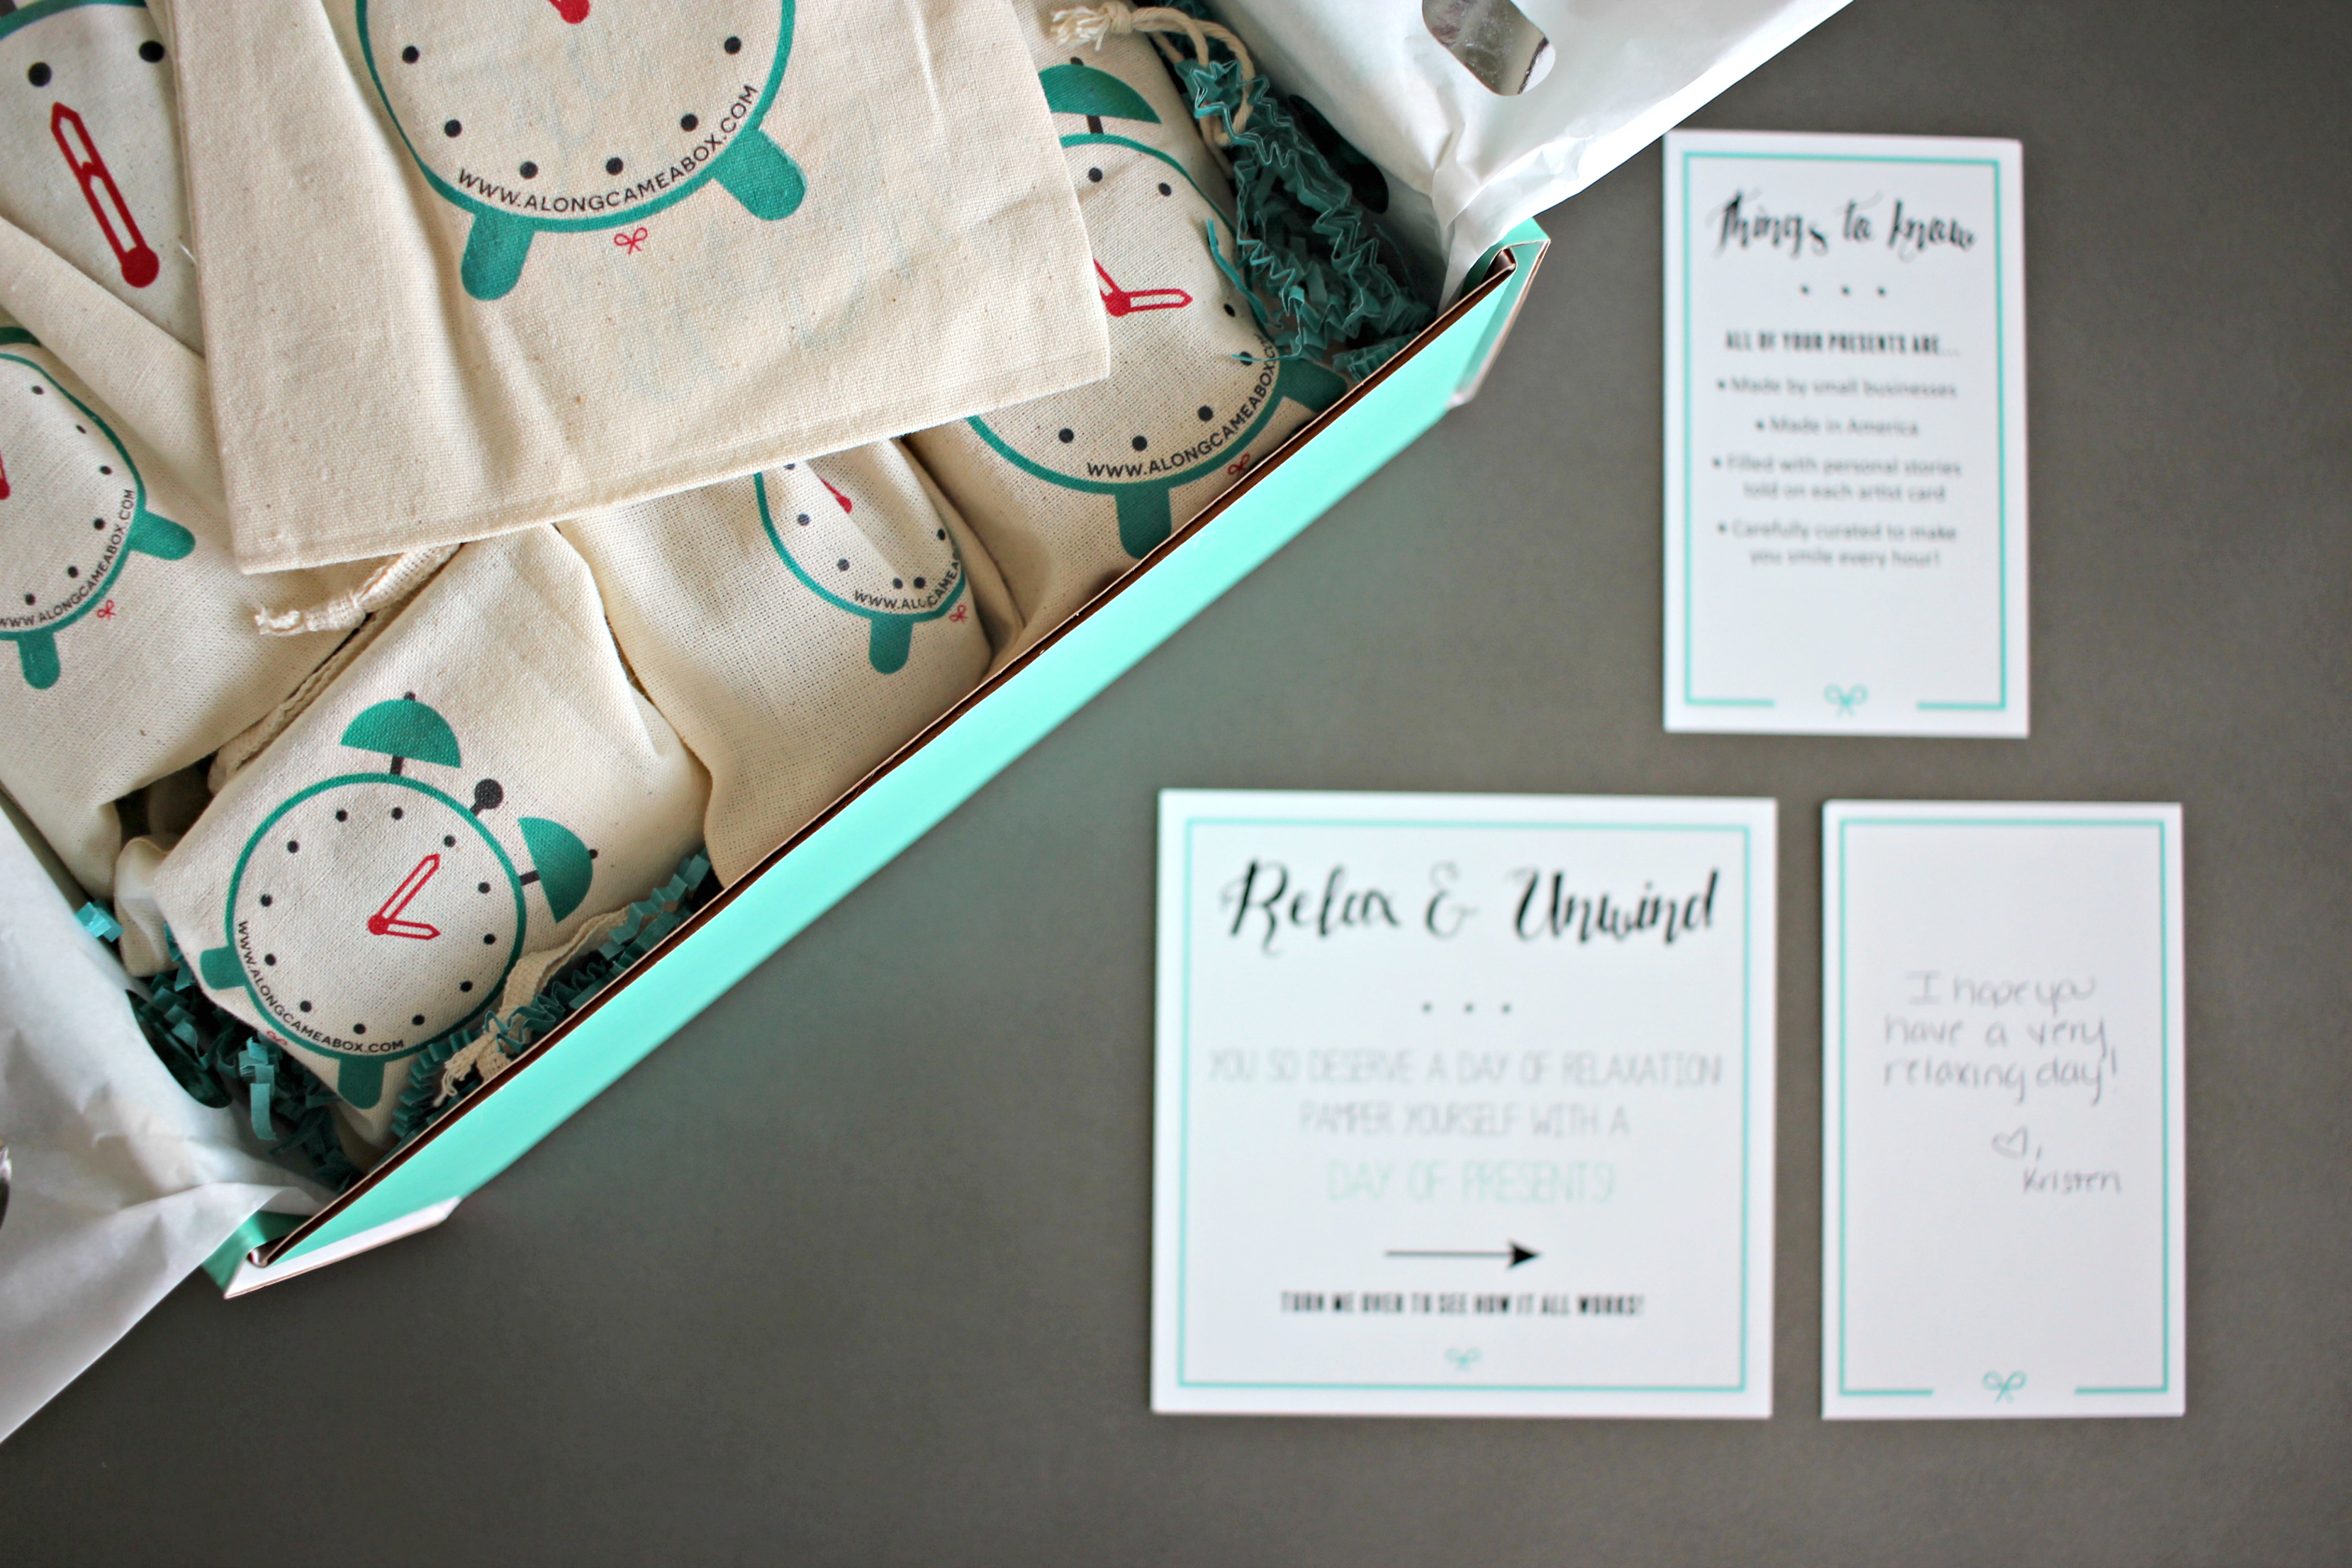 snail mail gift idea via Finding Beautiful Truth